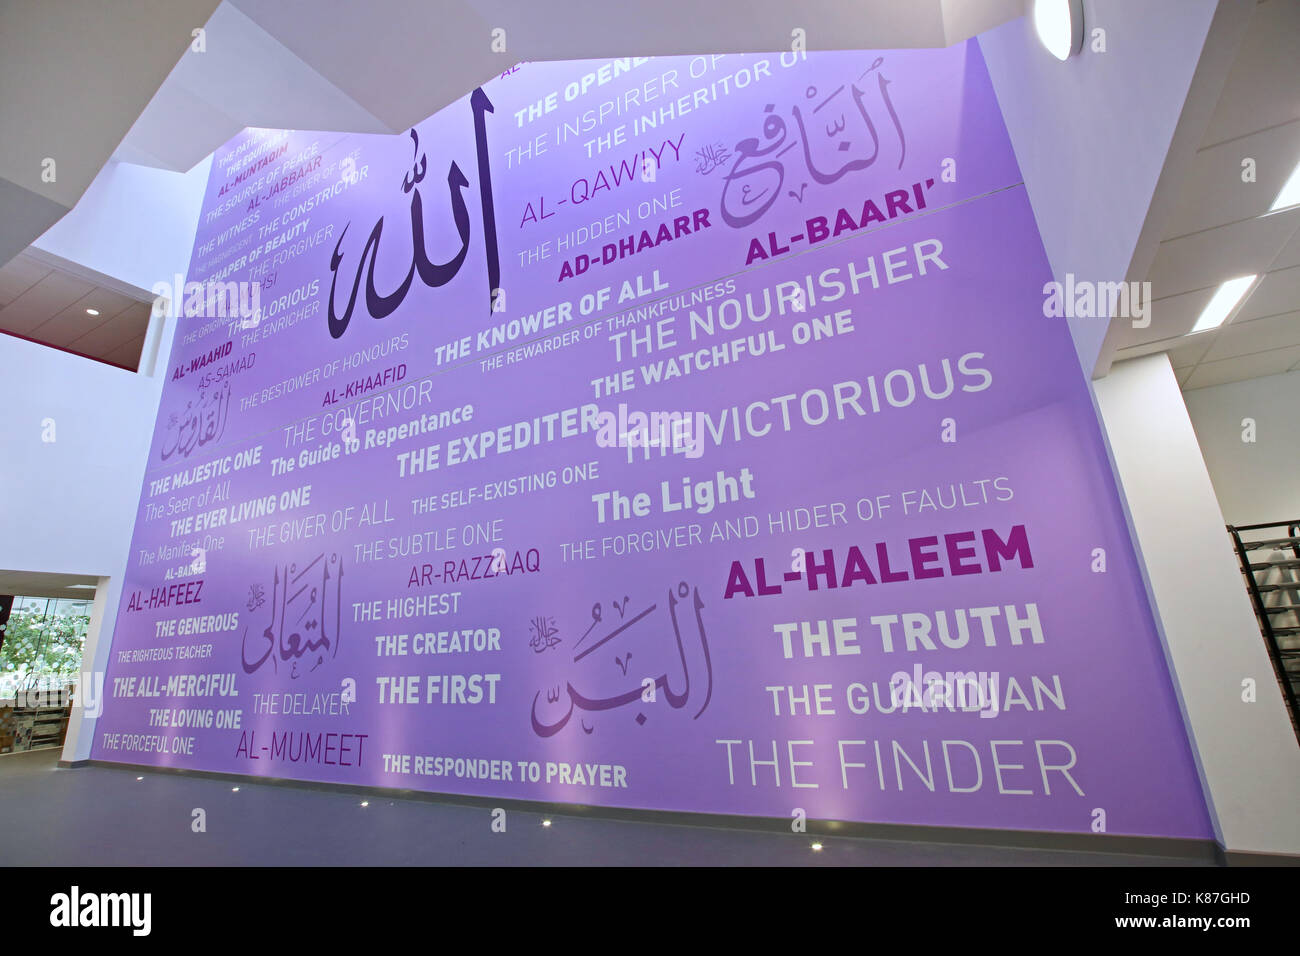 Three-storey high mural on the atrium wall of a new, Islamic Faith School in London. Displays descriptions of The Prophet in English and Arabic text. Stock Photo